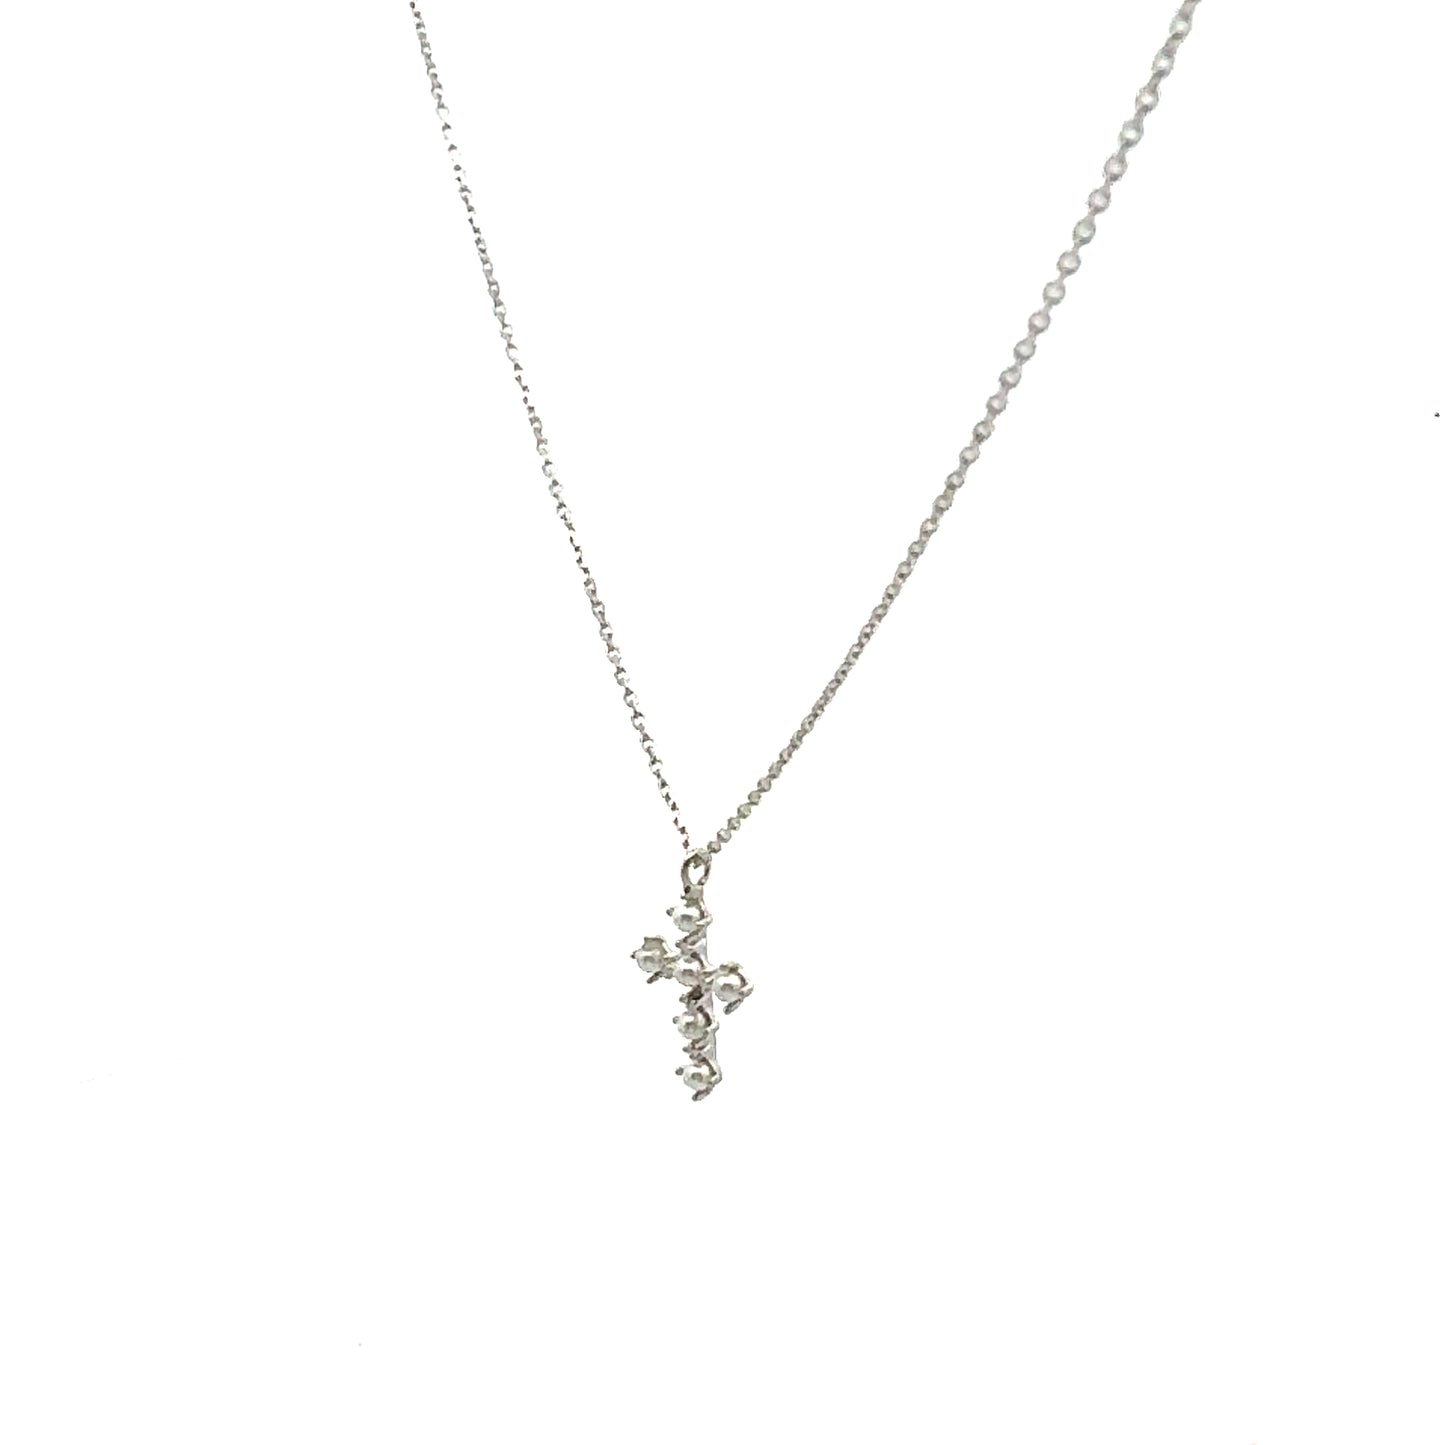 Pearly Cross Necklace In Sliver